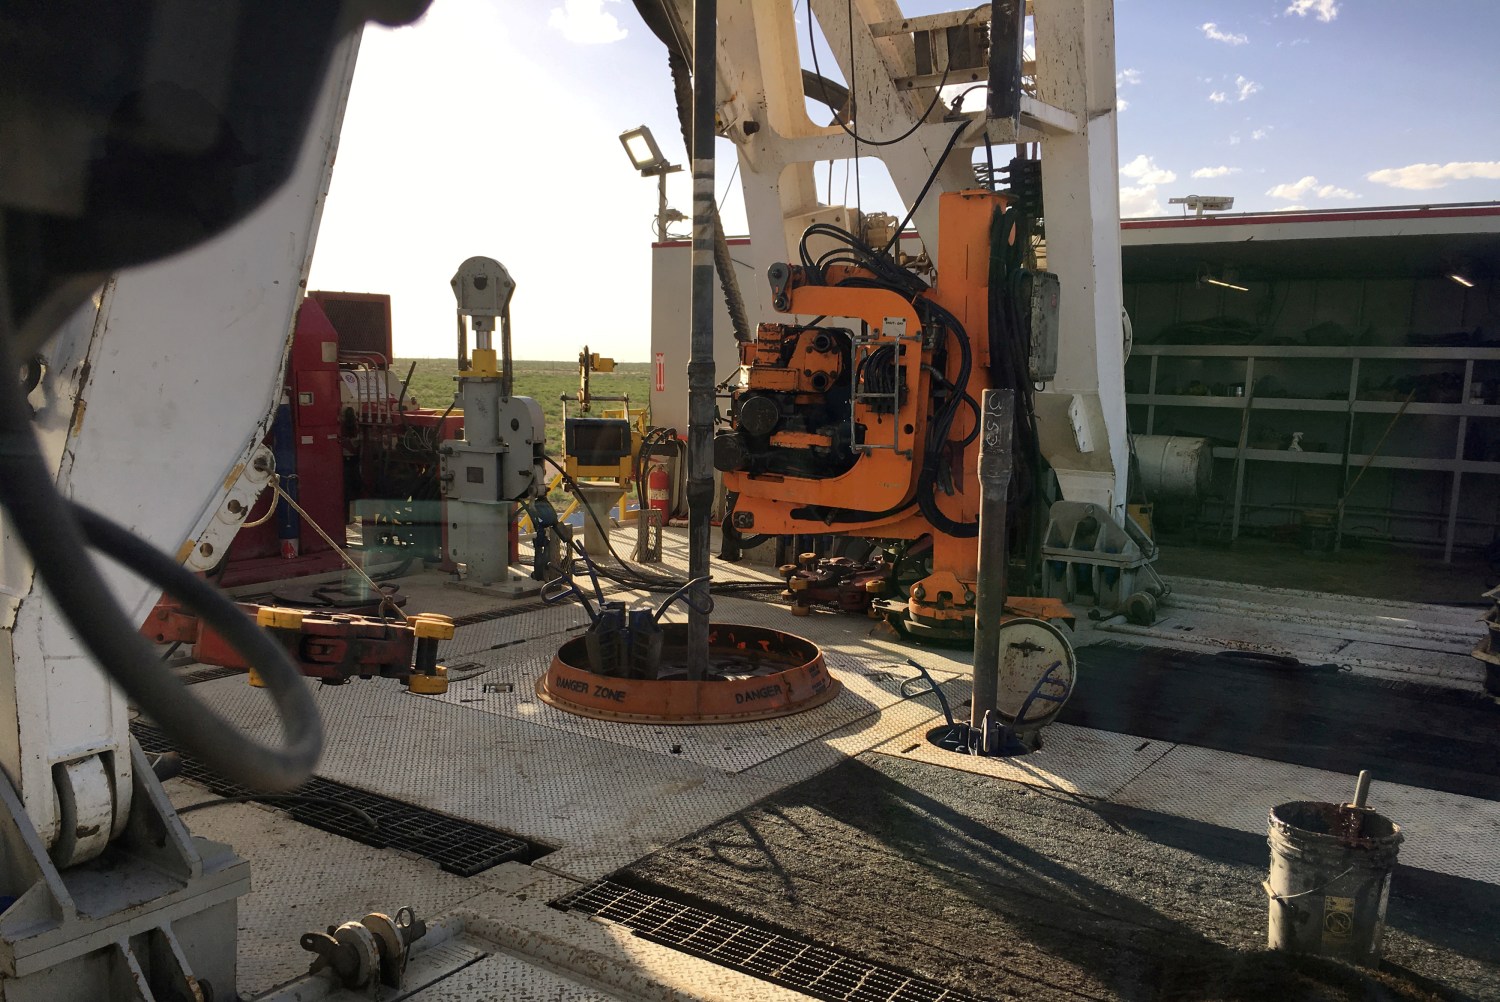 The Elevation Resources drilling rig is shown at the Permian Basin drilling site in Andrews County, Texas, U.S. on May 16, 2016. REUTERS/Ann Saphir/File Photo - RTX2H3SN